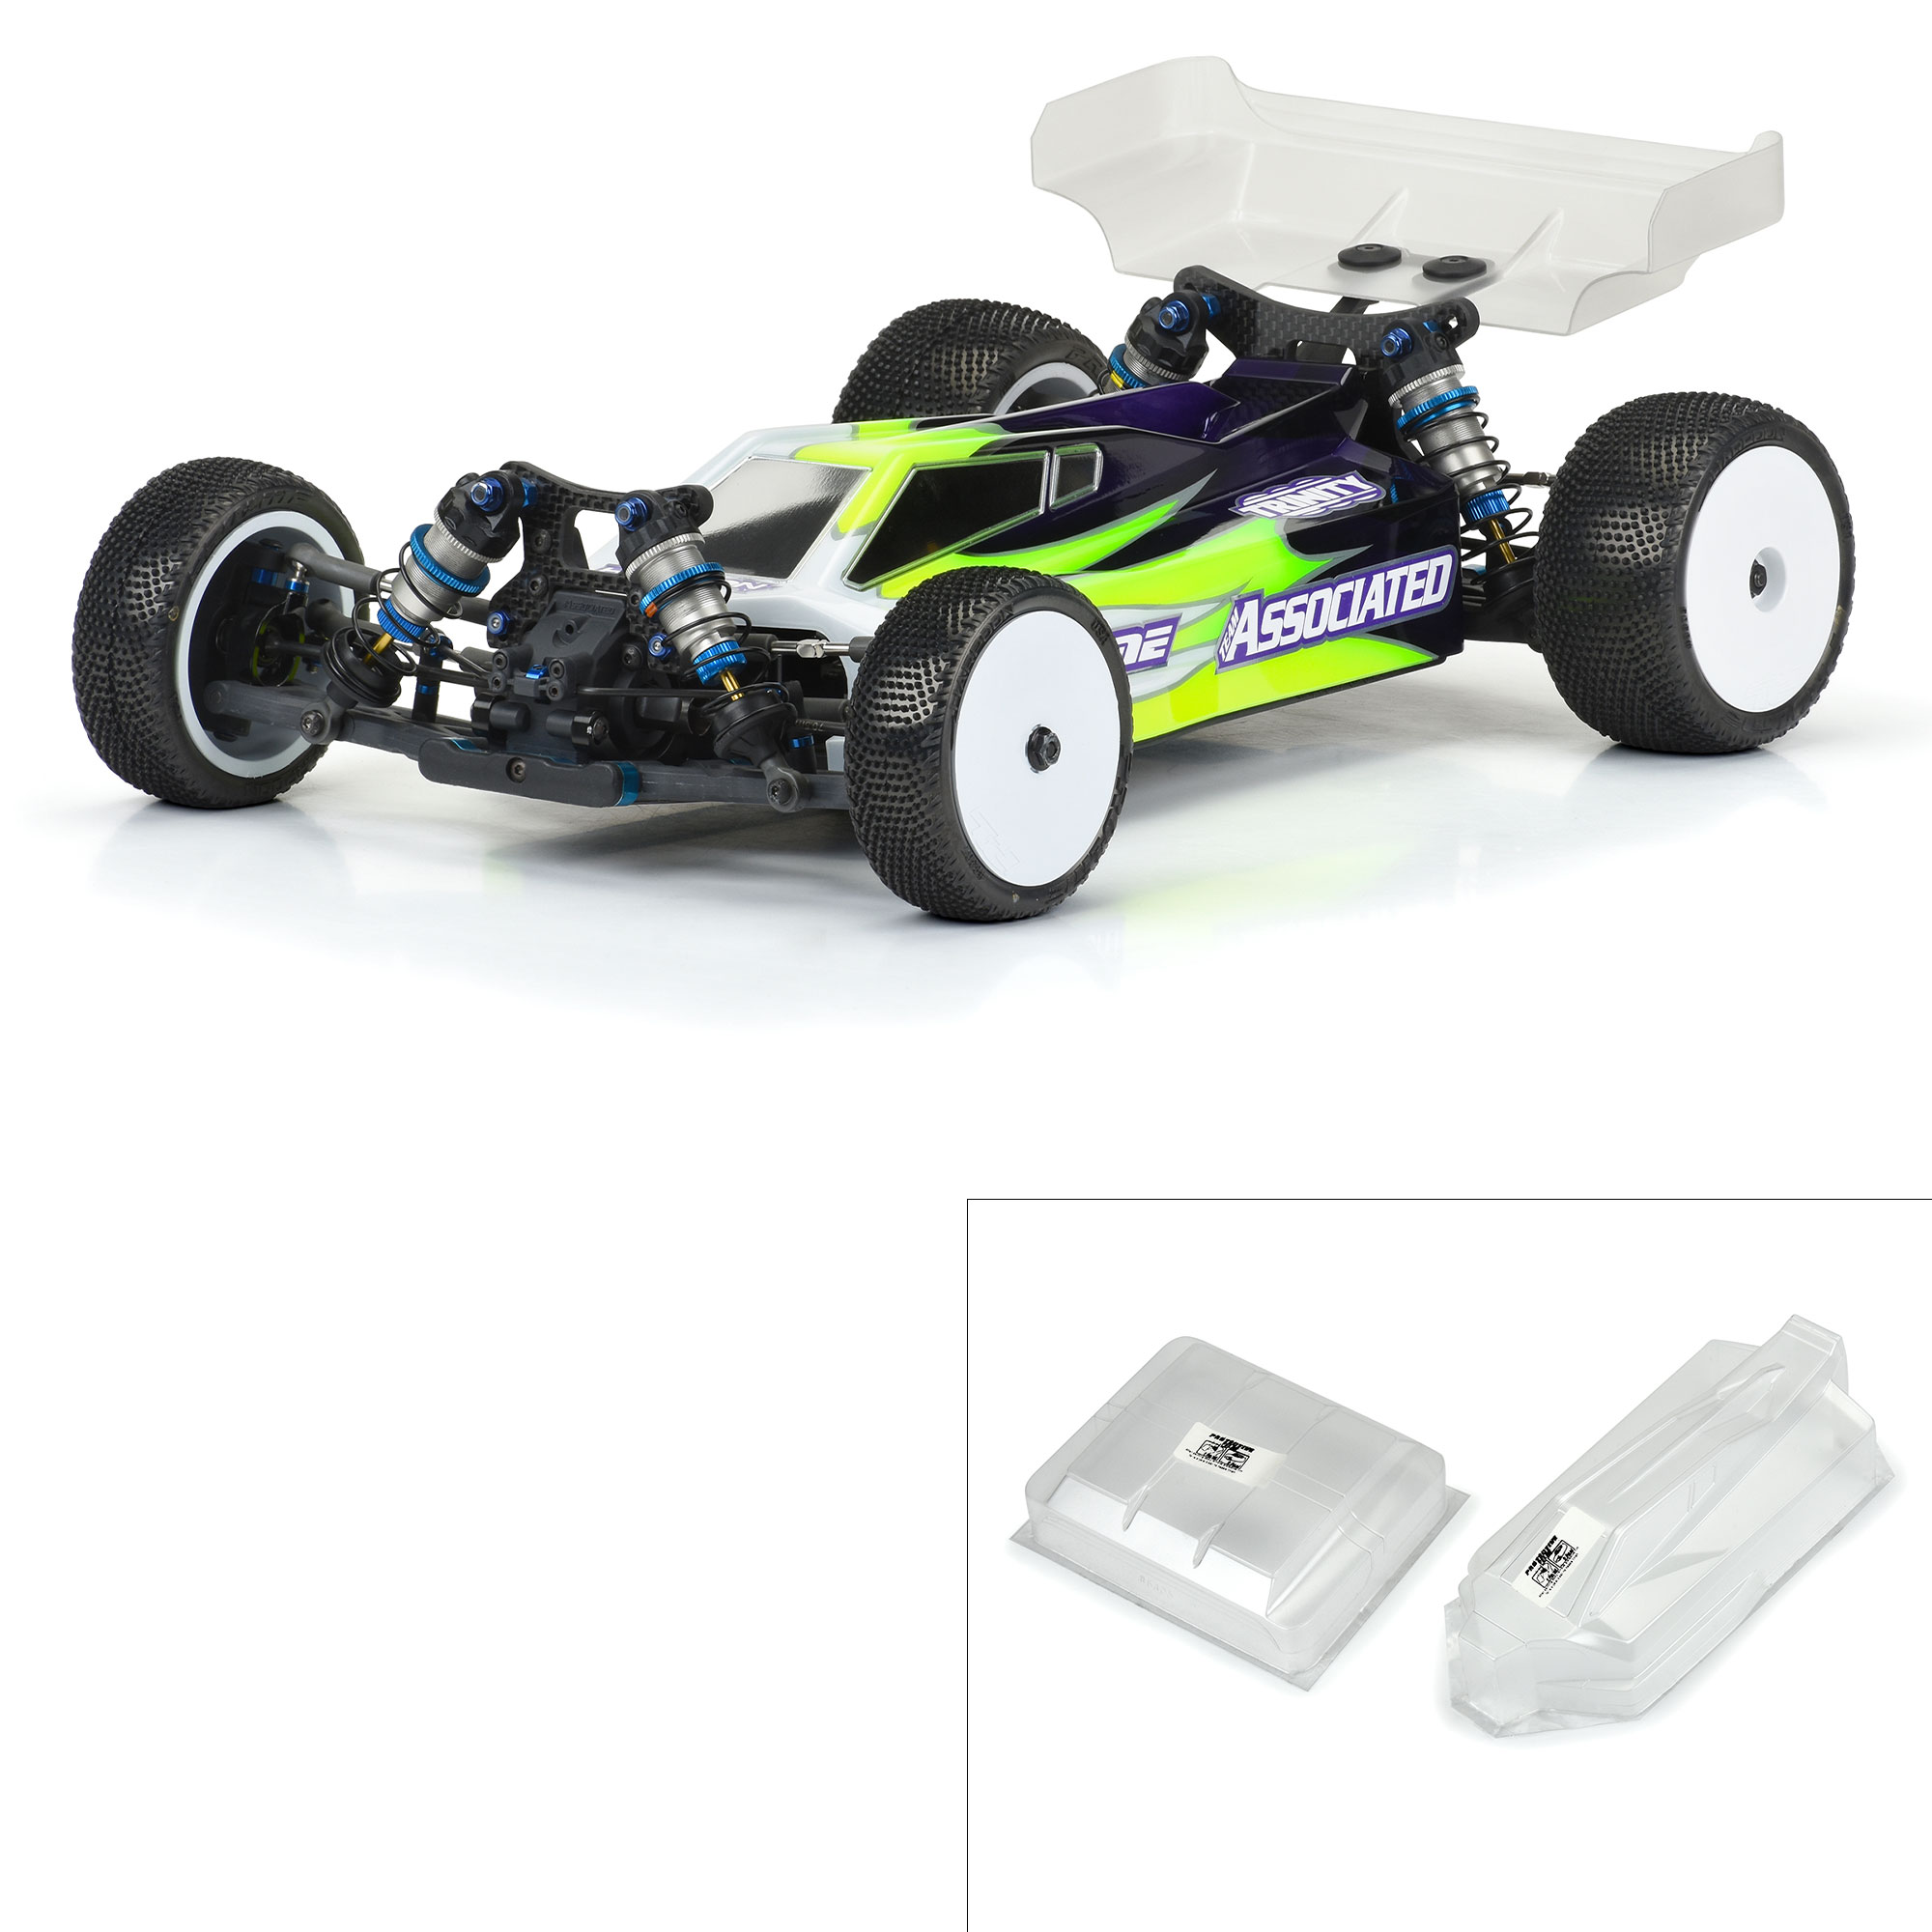 Pro-Line Racing 1/10 Sector Light Weight Clear Body: AE B74.2 